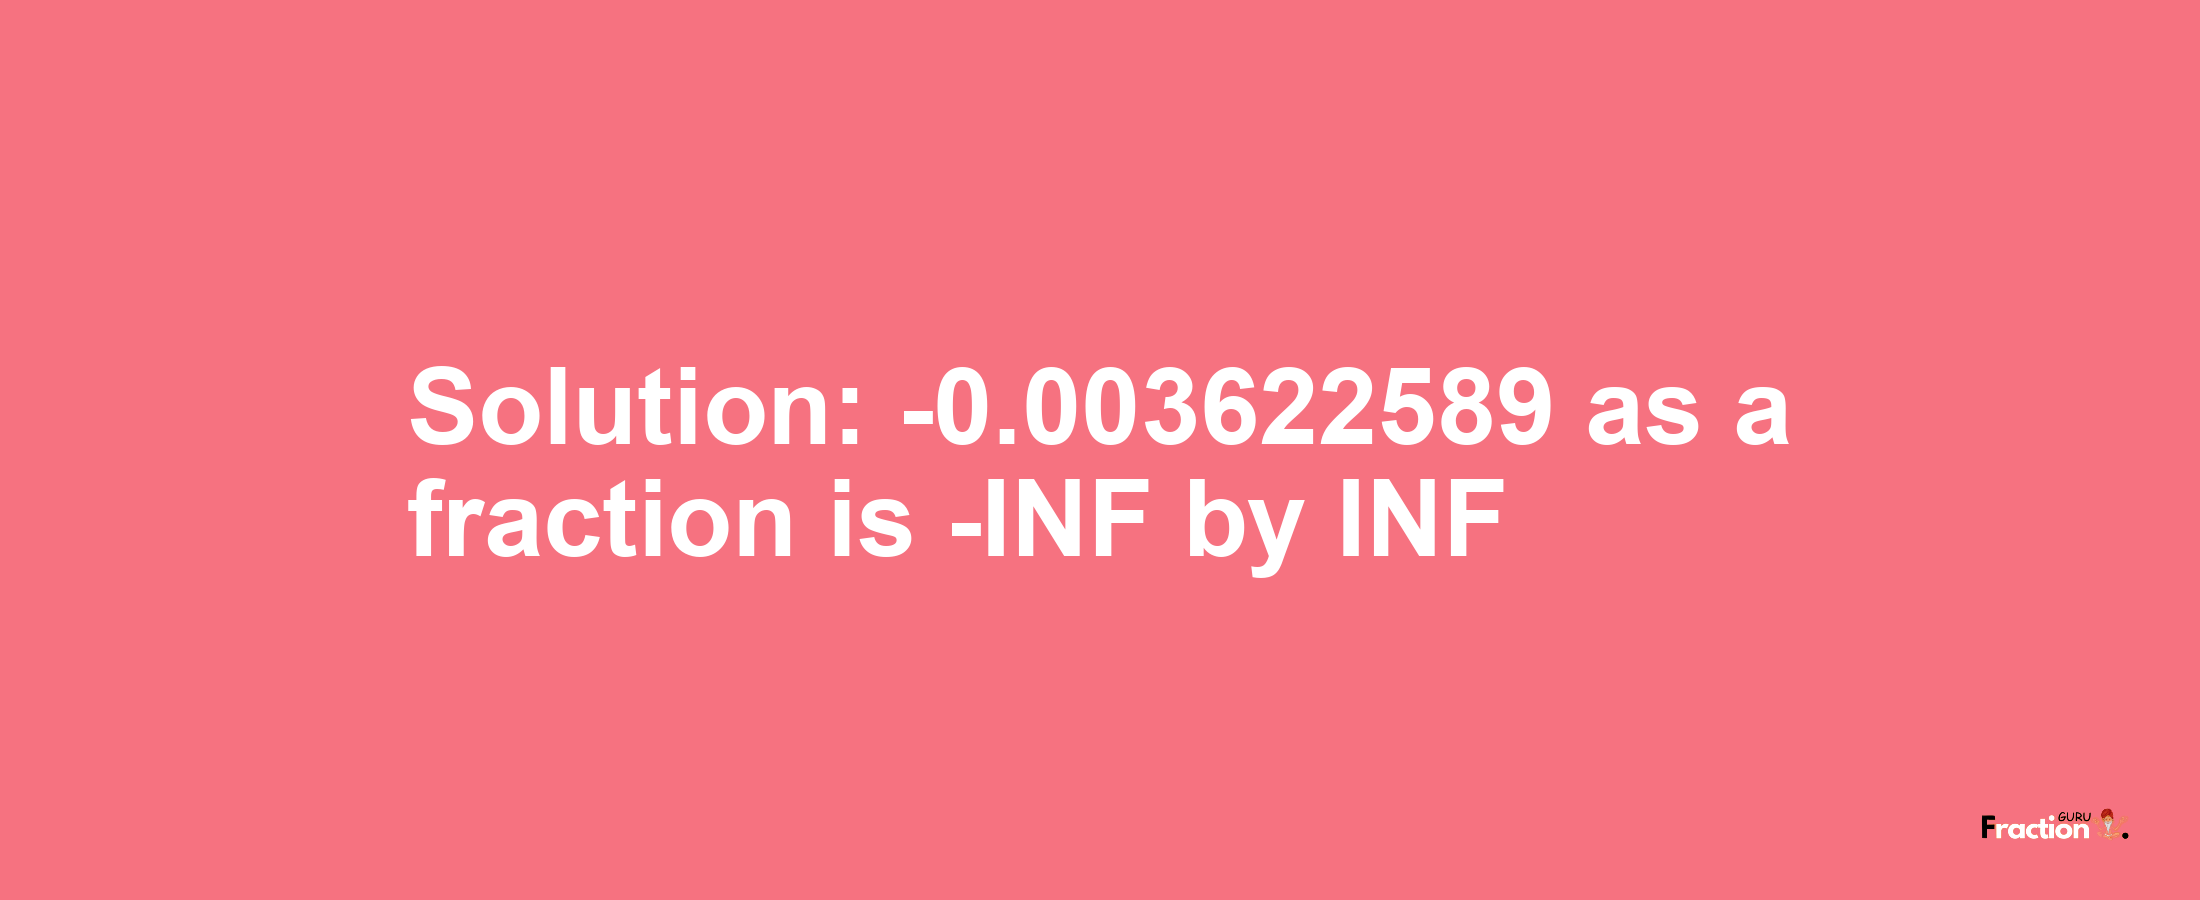 Solution:-0.003622589 as a fraction is -INF/INF